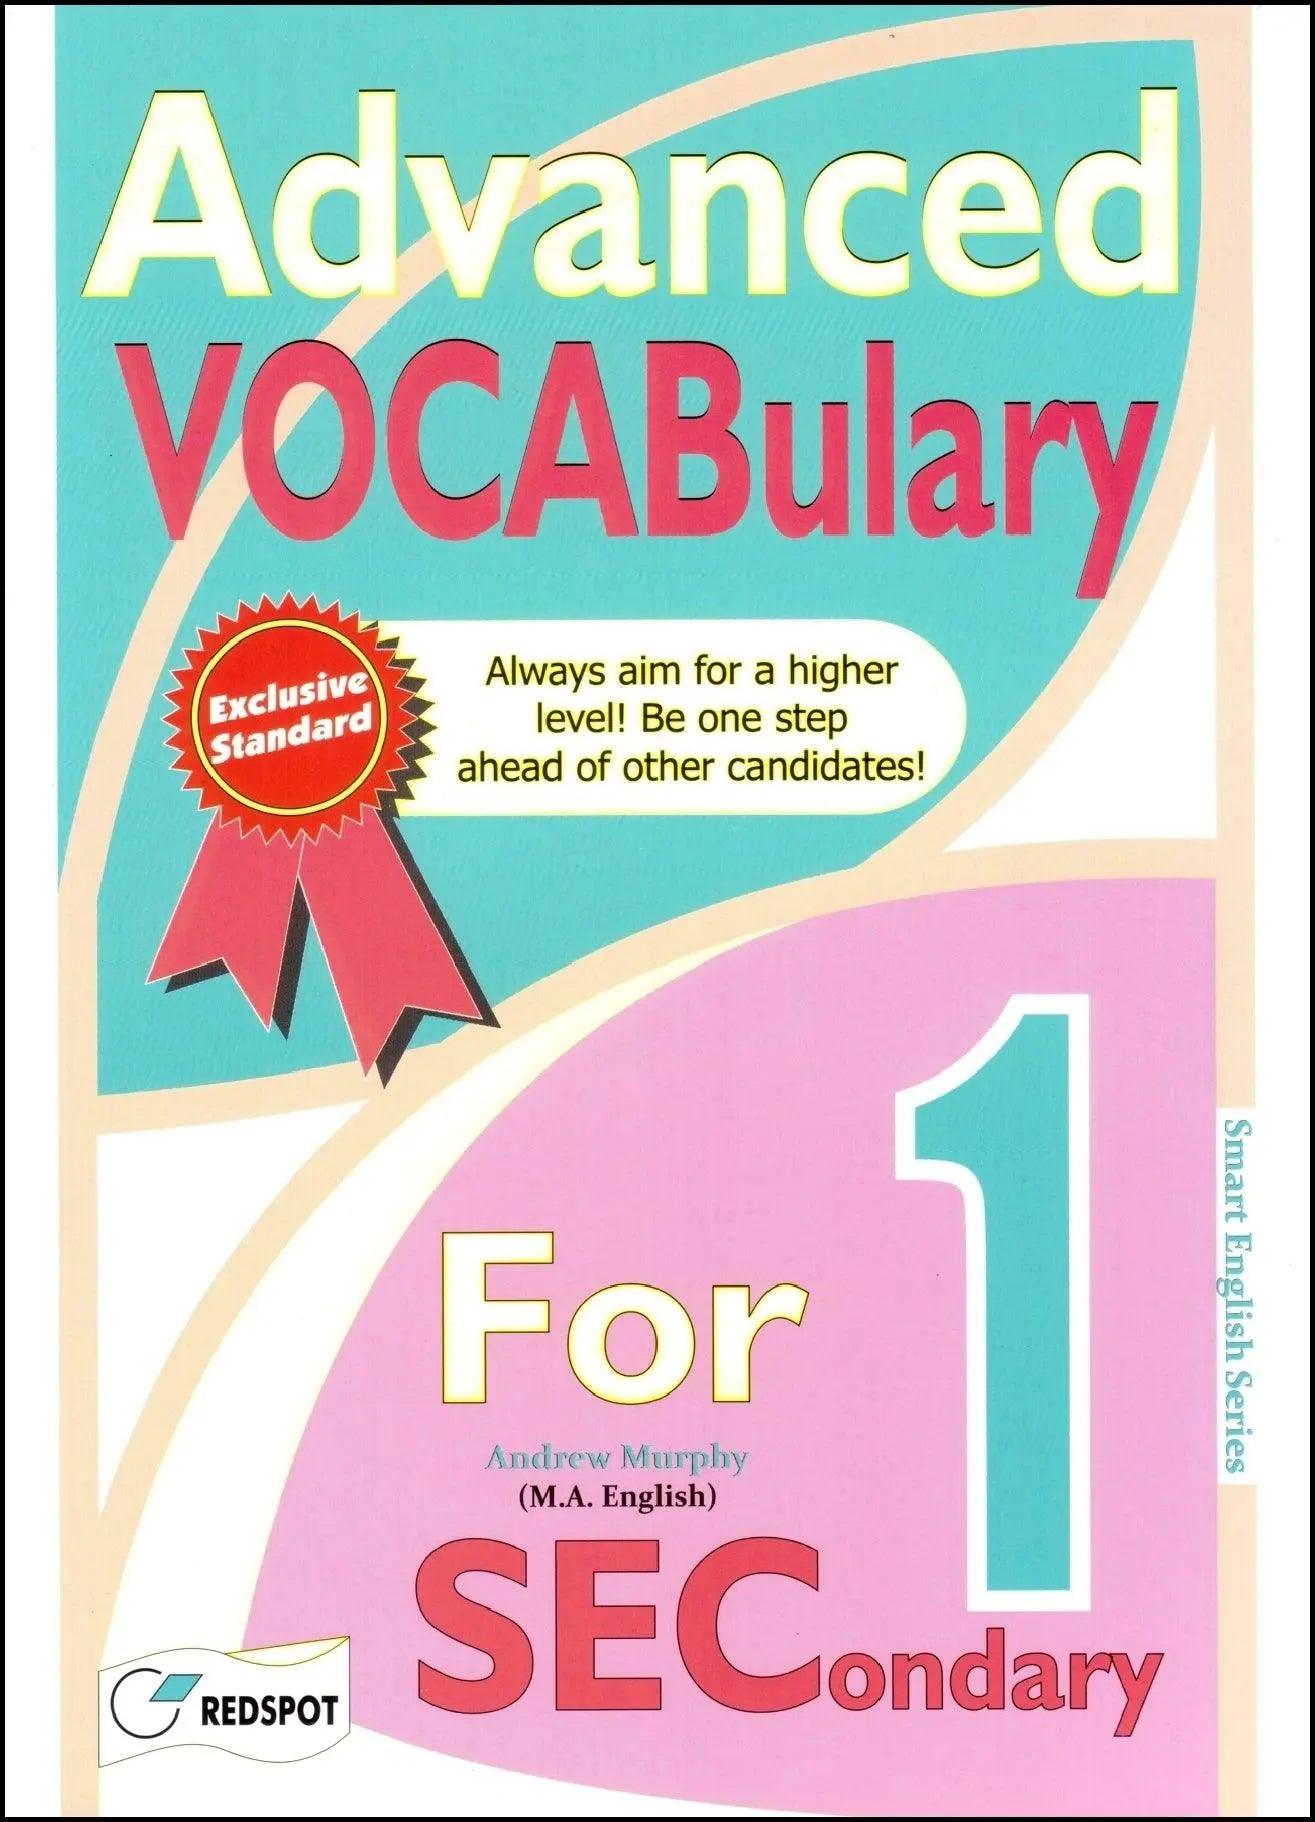 O Level Advanced English Vocabulary for Secondary 1 The Stationers